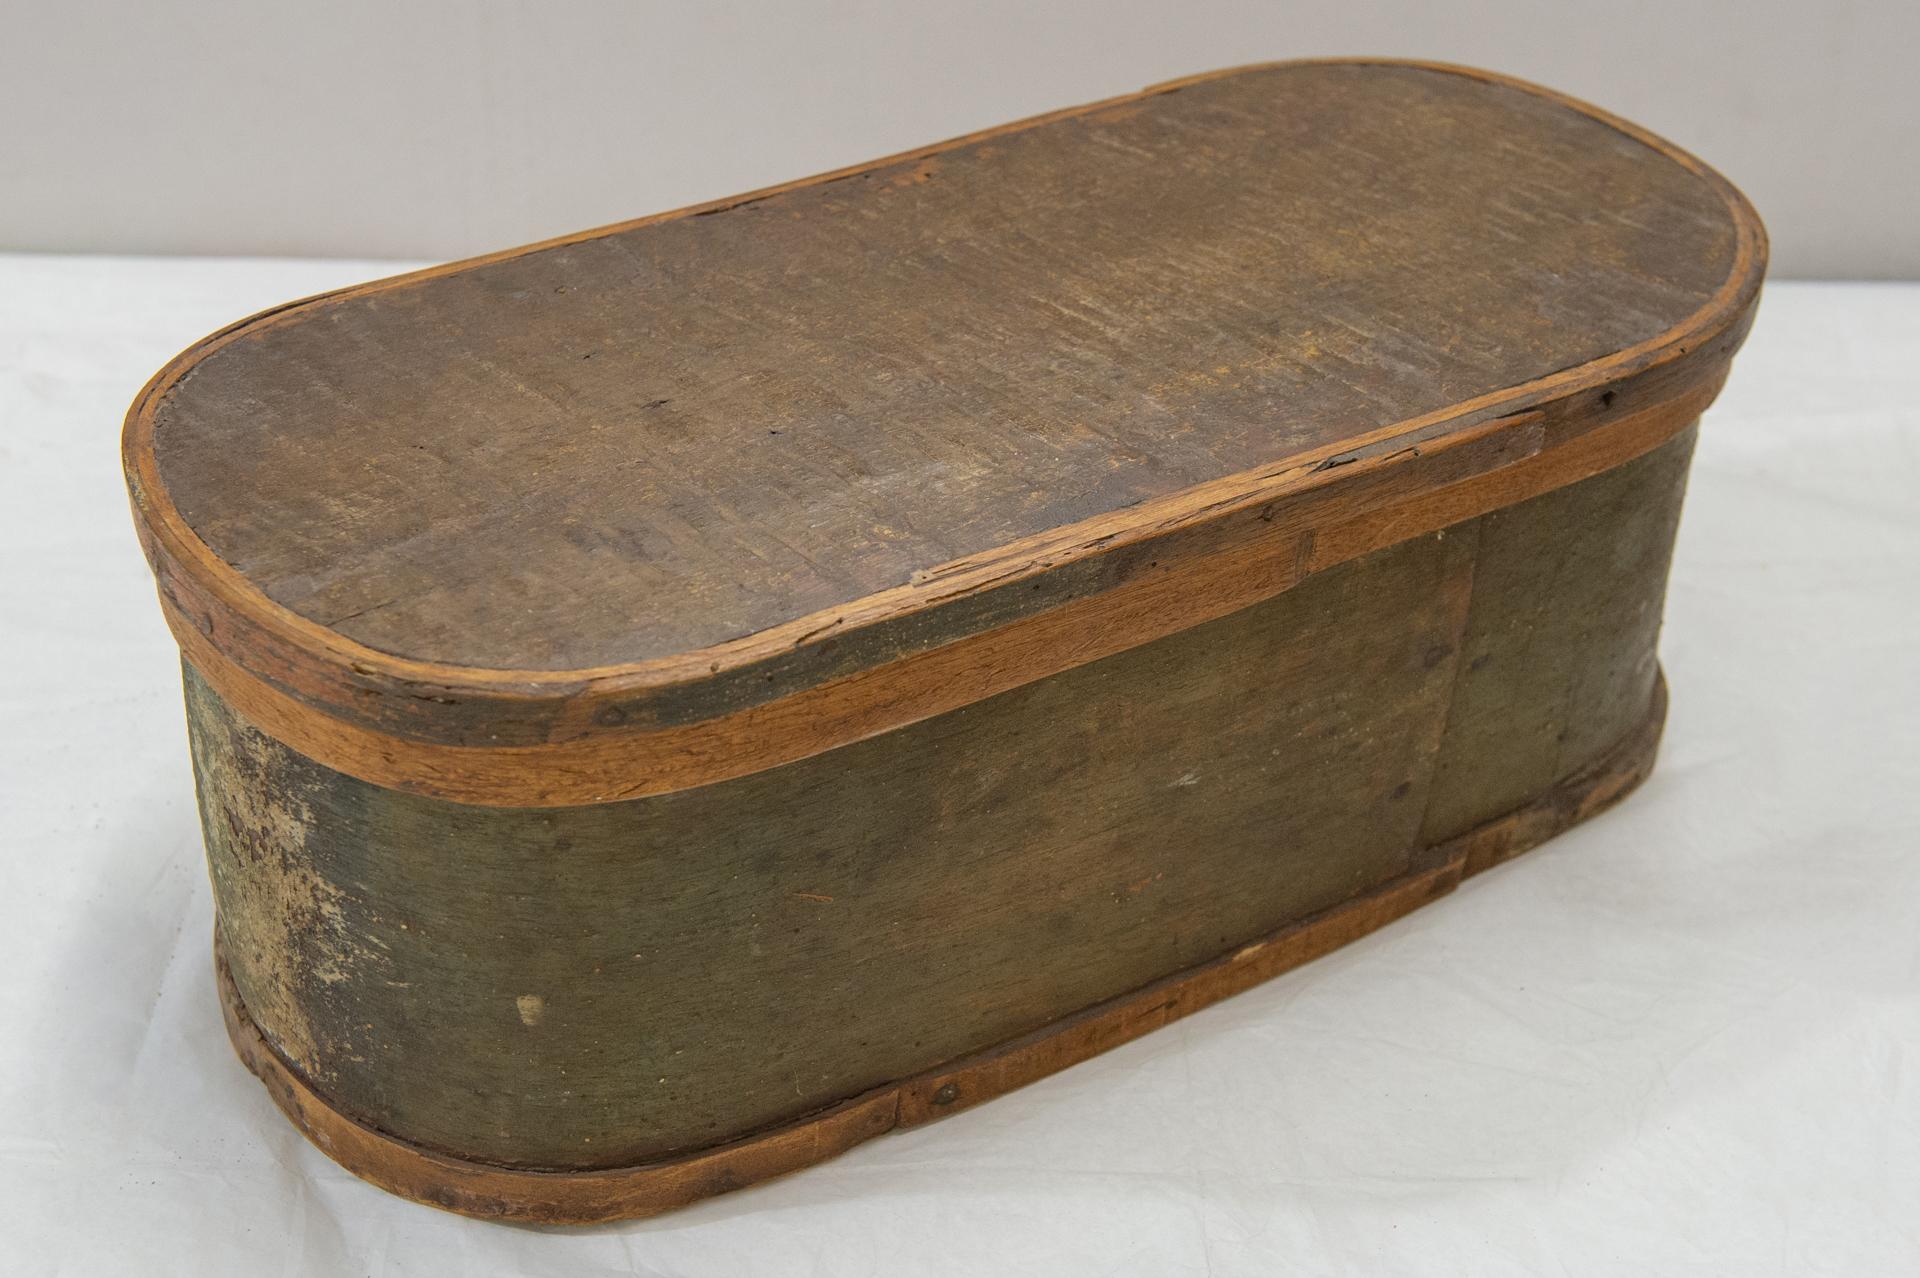 Italian Oval Wooden Apothecary or Pharmacy Pair Boxes For Sale